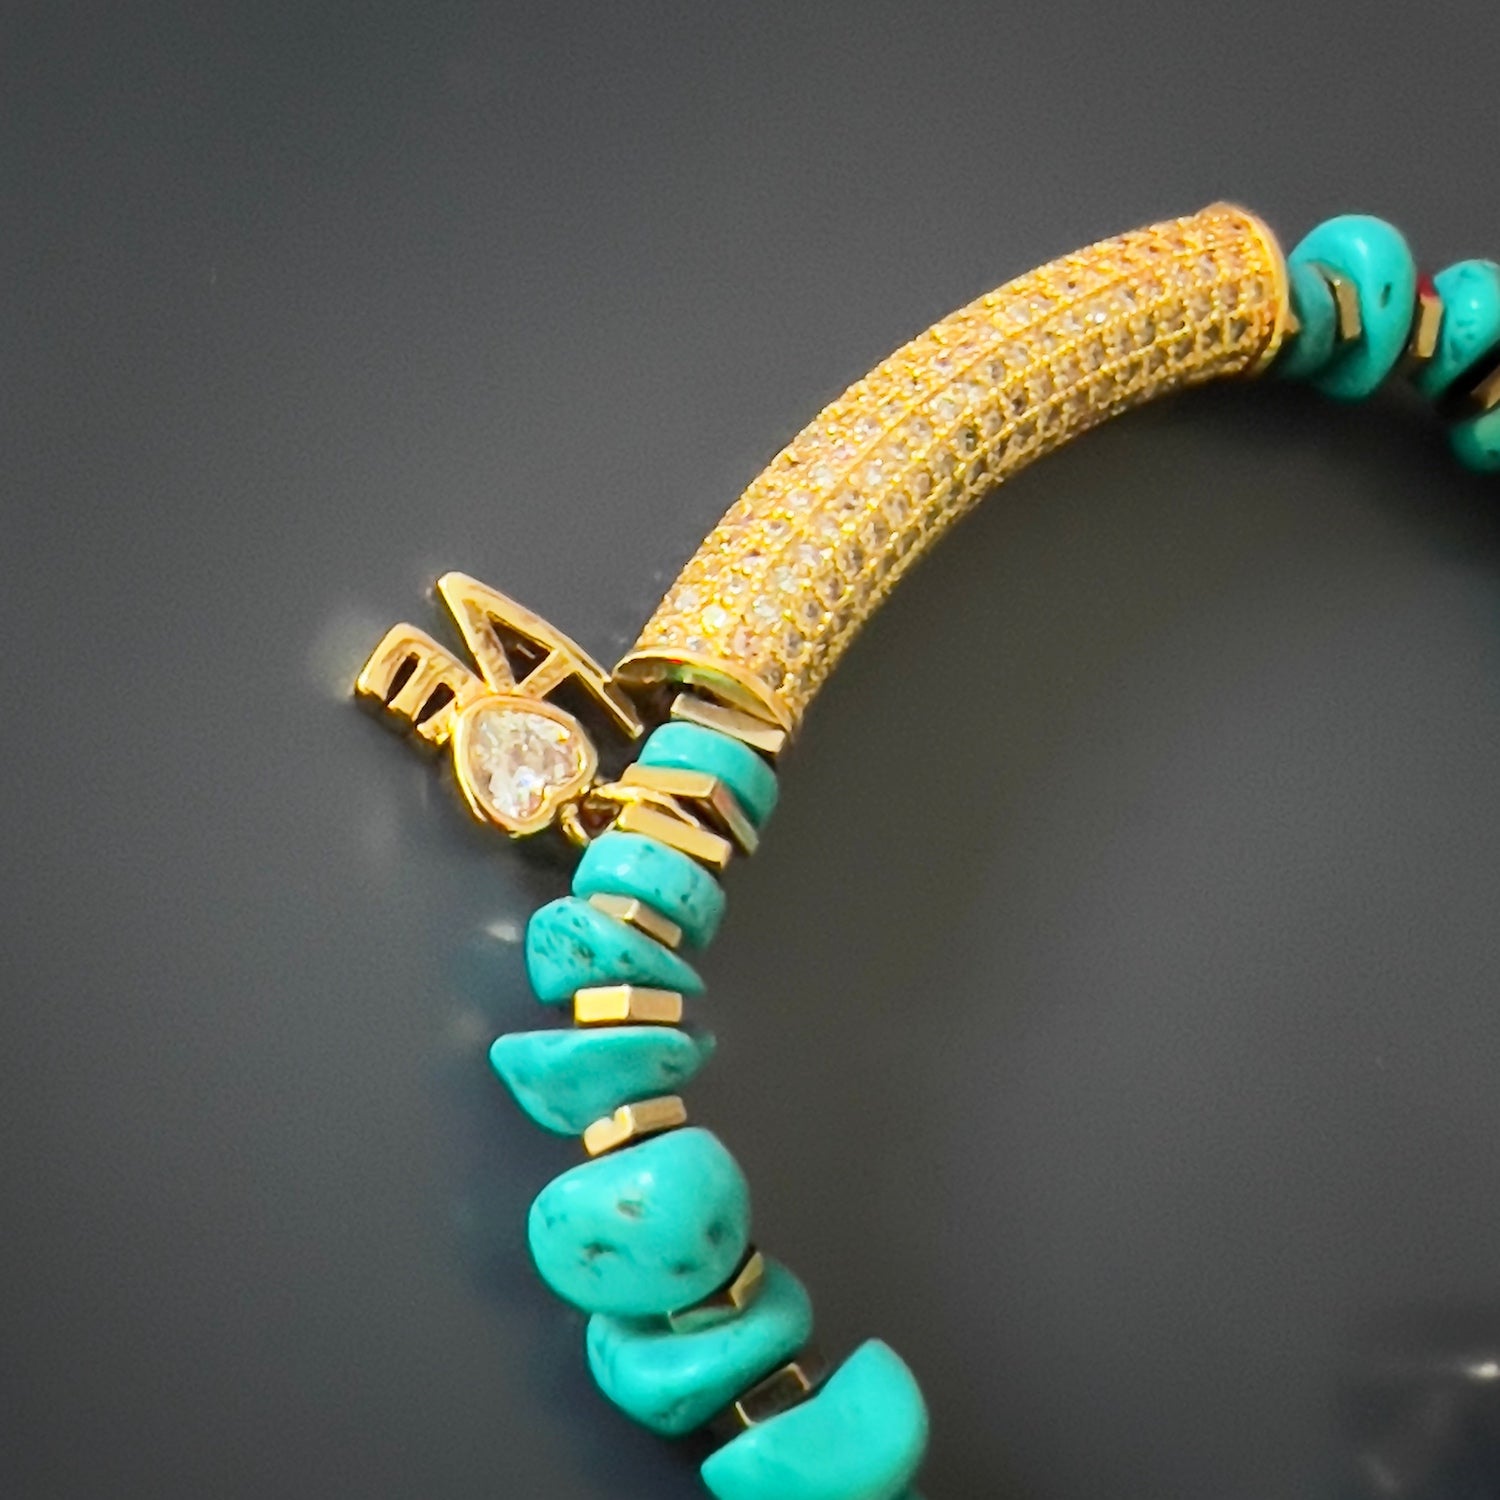 A close-up view of the Diamond and Turquoise Love Bracelet, showcasing its natural nugget turquoise stone beads, gold color hematite spacers, and a gold plated charm with a simulated diamond. The bronze bead with elephant, evil eye, and hamsa symbols adds an extra touch of protection and symbolism.